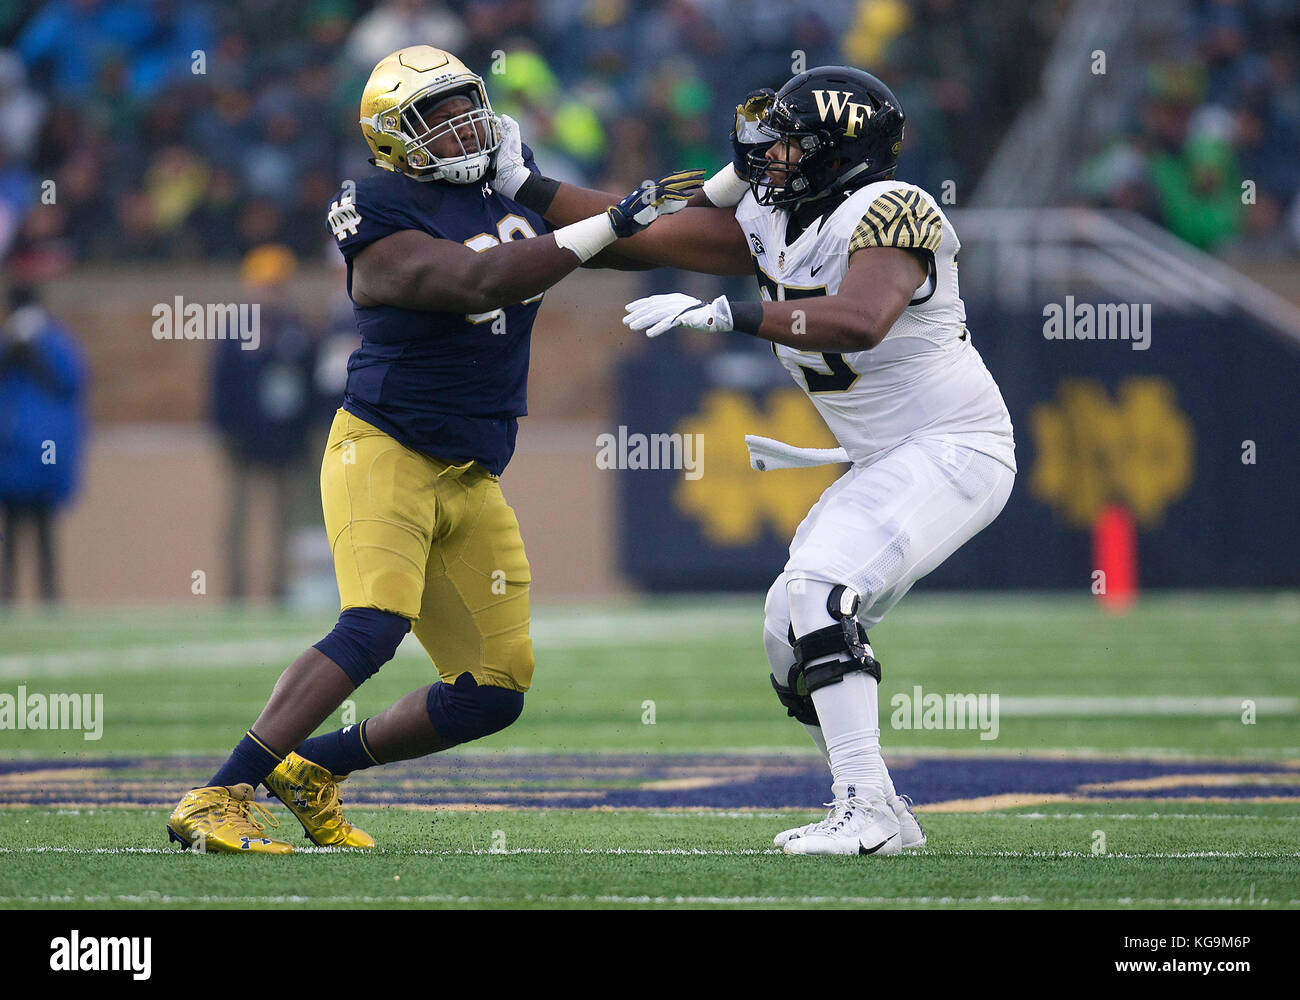 November 04, 2017: Wake Forest offensive lineman Justin Herron (75) and Notre Dame defensive lineman Jay Hayes (93) battle at the line of scrimmage during NCAA football game action between the Wake Forest Demon Deacons and the Notre Dame Fighting Irish at Notre Dame Stadium in South Bend, Indiana. Notre Dame defeated Wake Forest 48-37. John Mersits/CSM Stock Photo